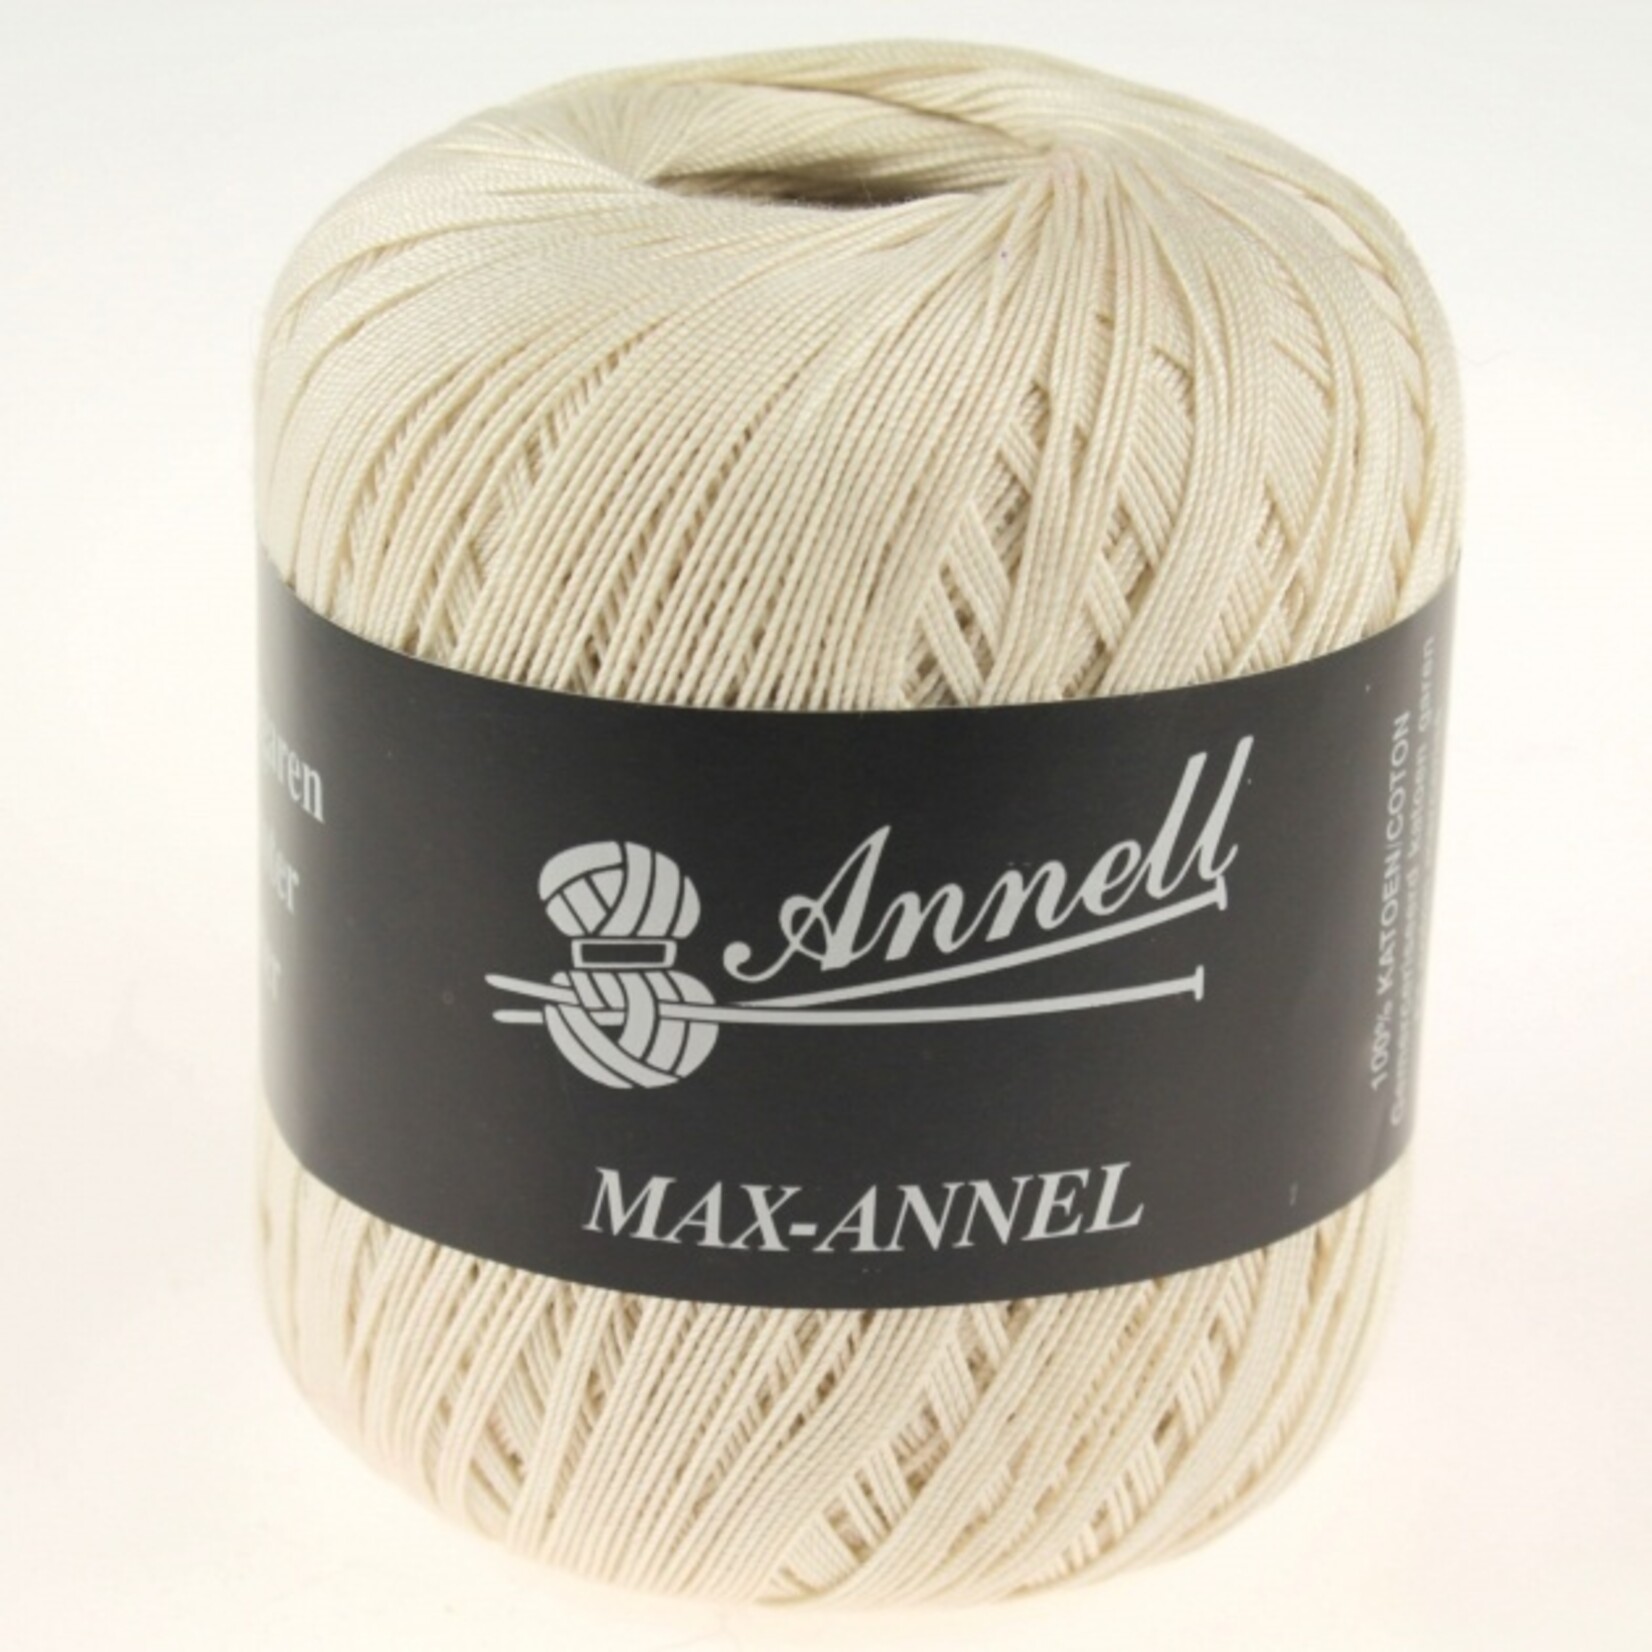 annell max 3460